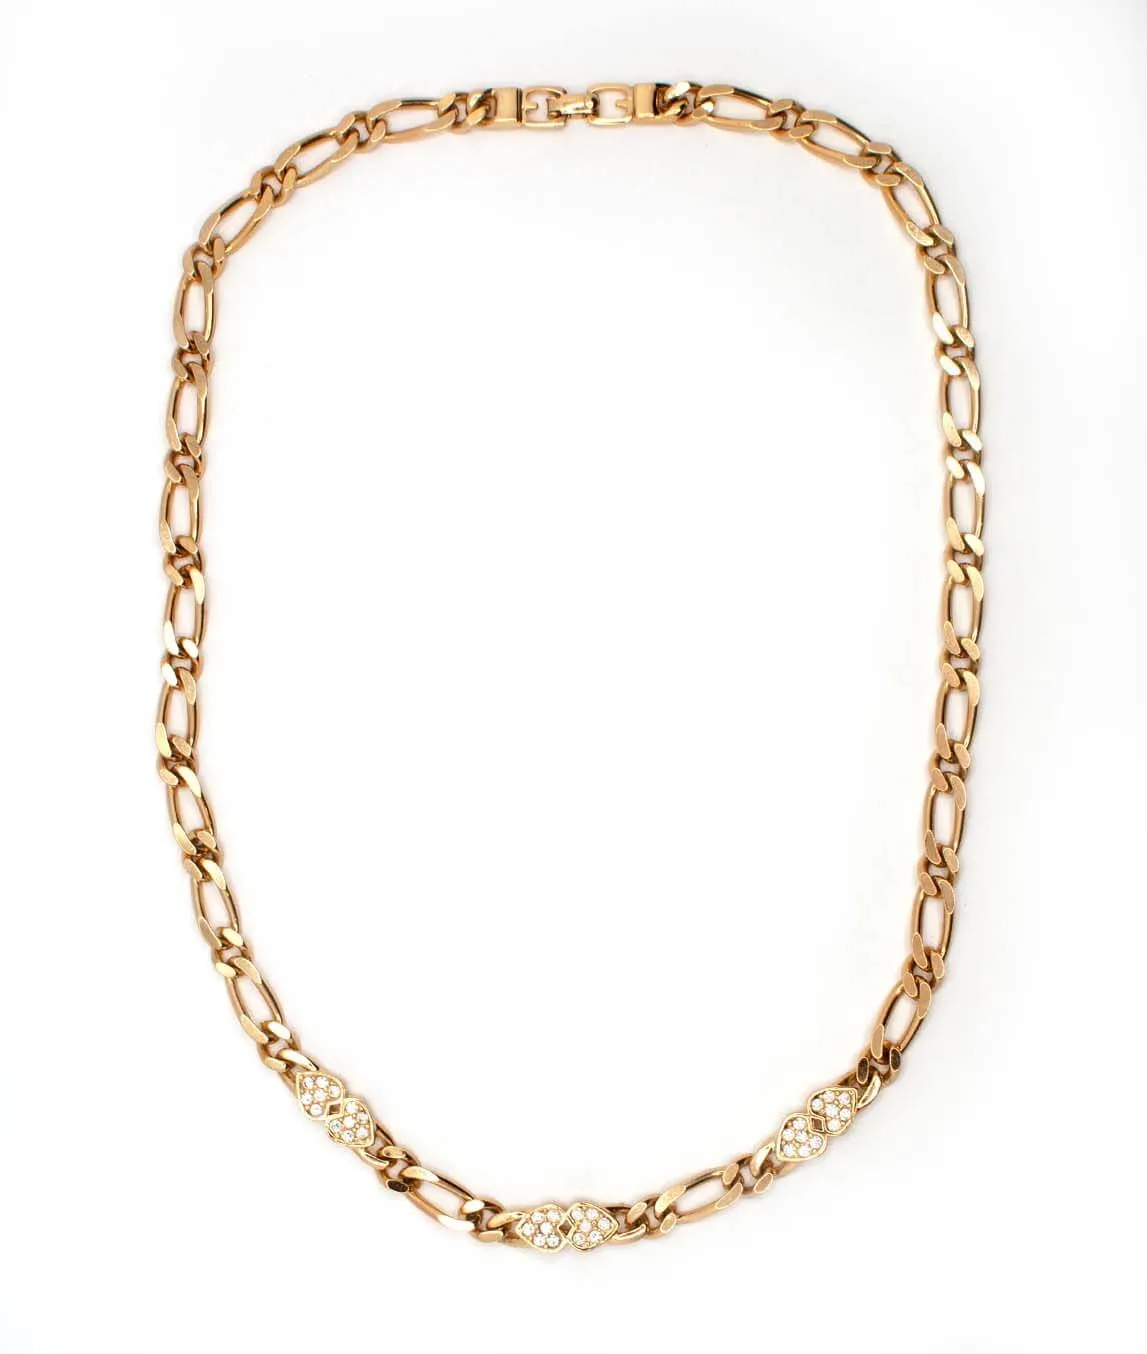 Fancy link gold tone chain necklace by Grosse jeweller to Christian Dior with rhinestone hearts